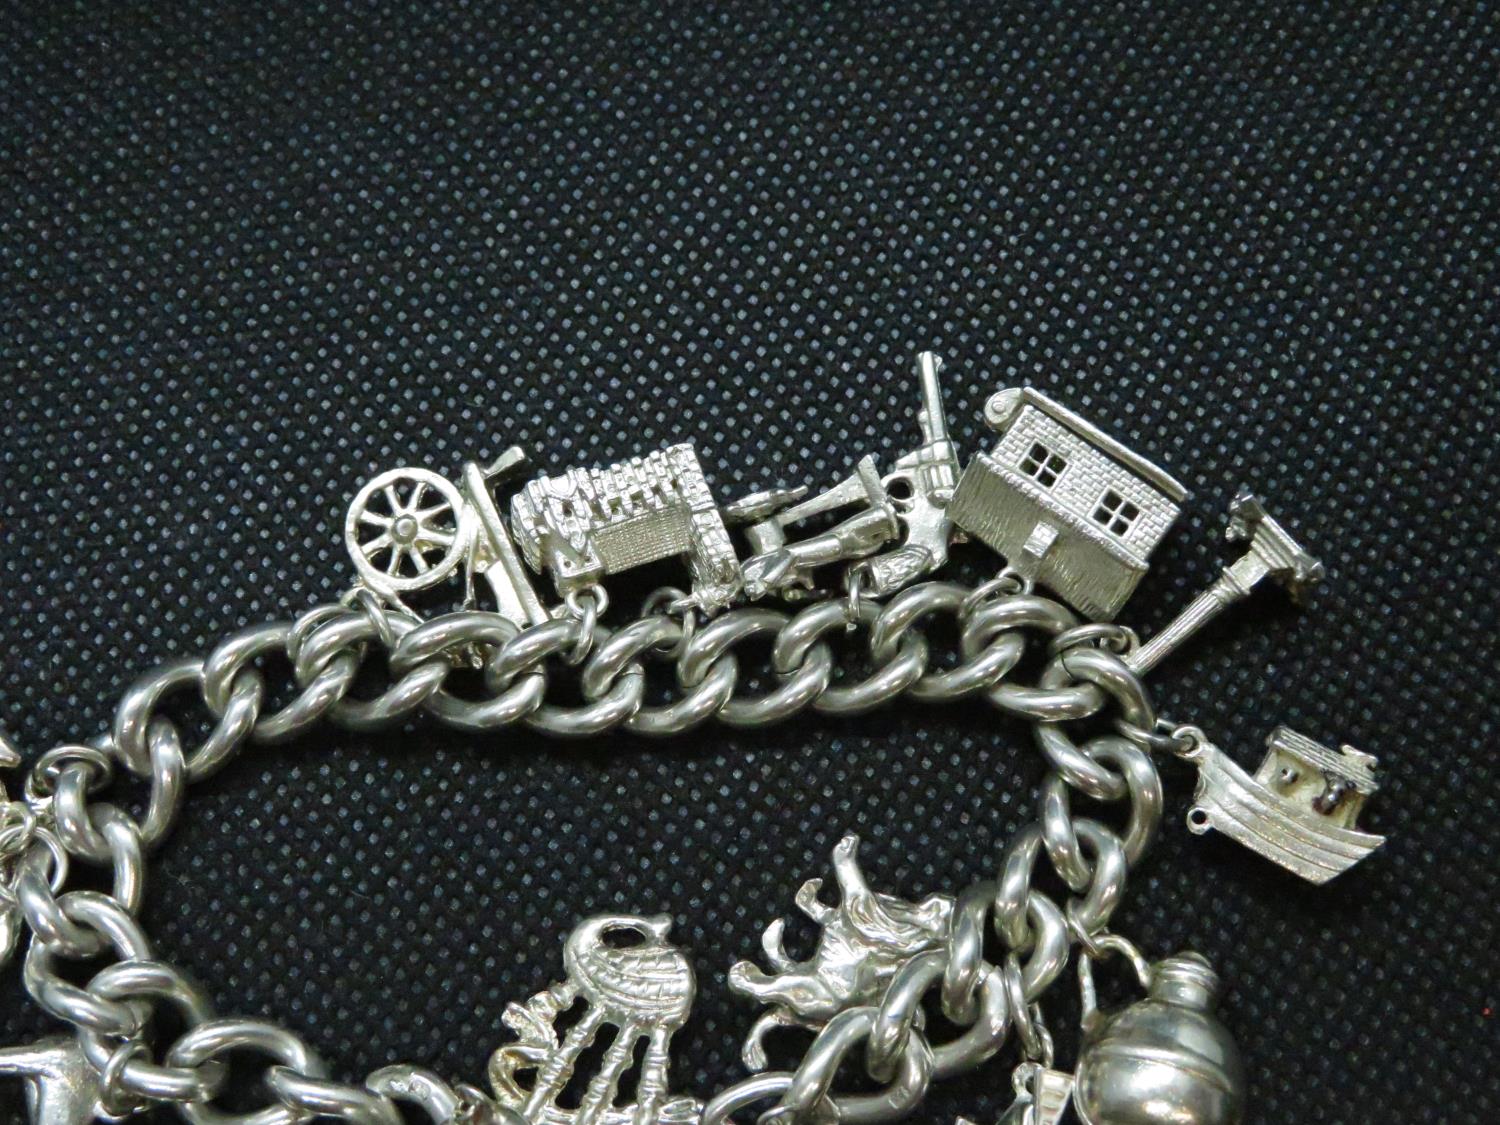 Vintage silver charm bracelet with 15x charms HM London 1955 69grams - Image 2 of 3